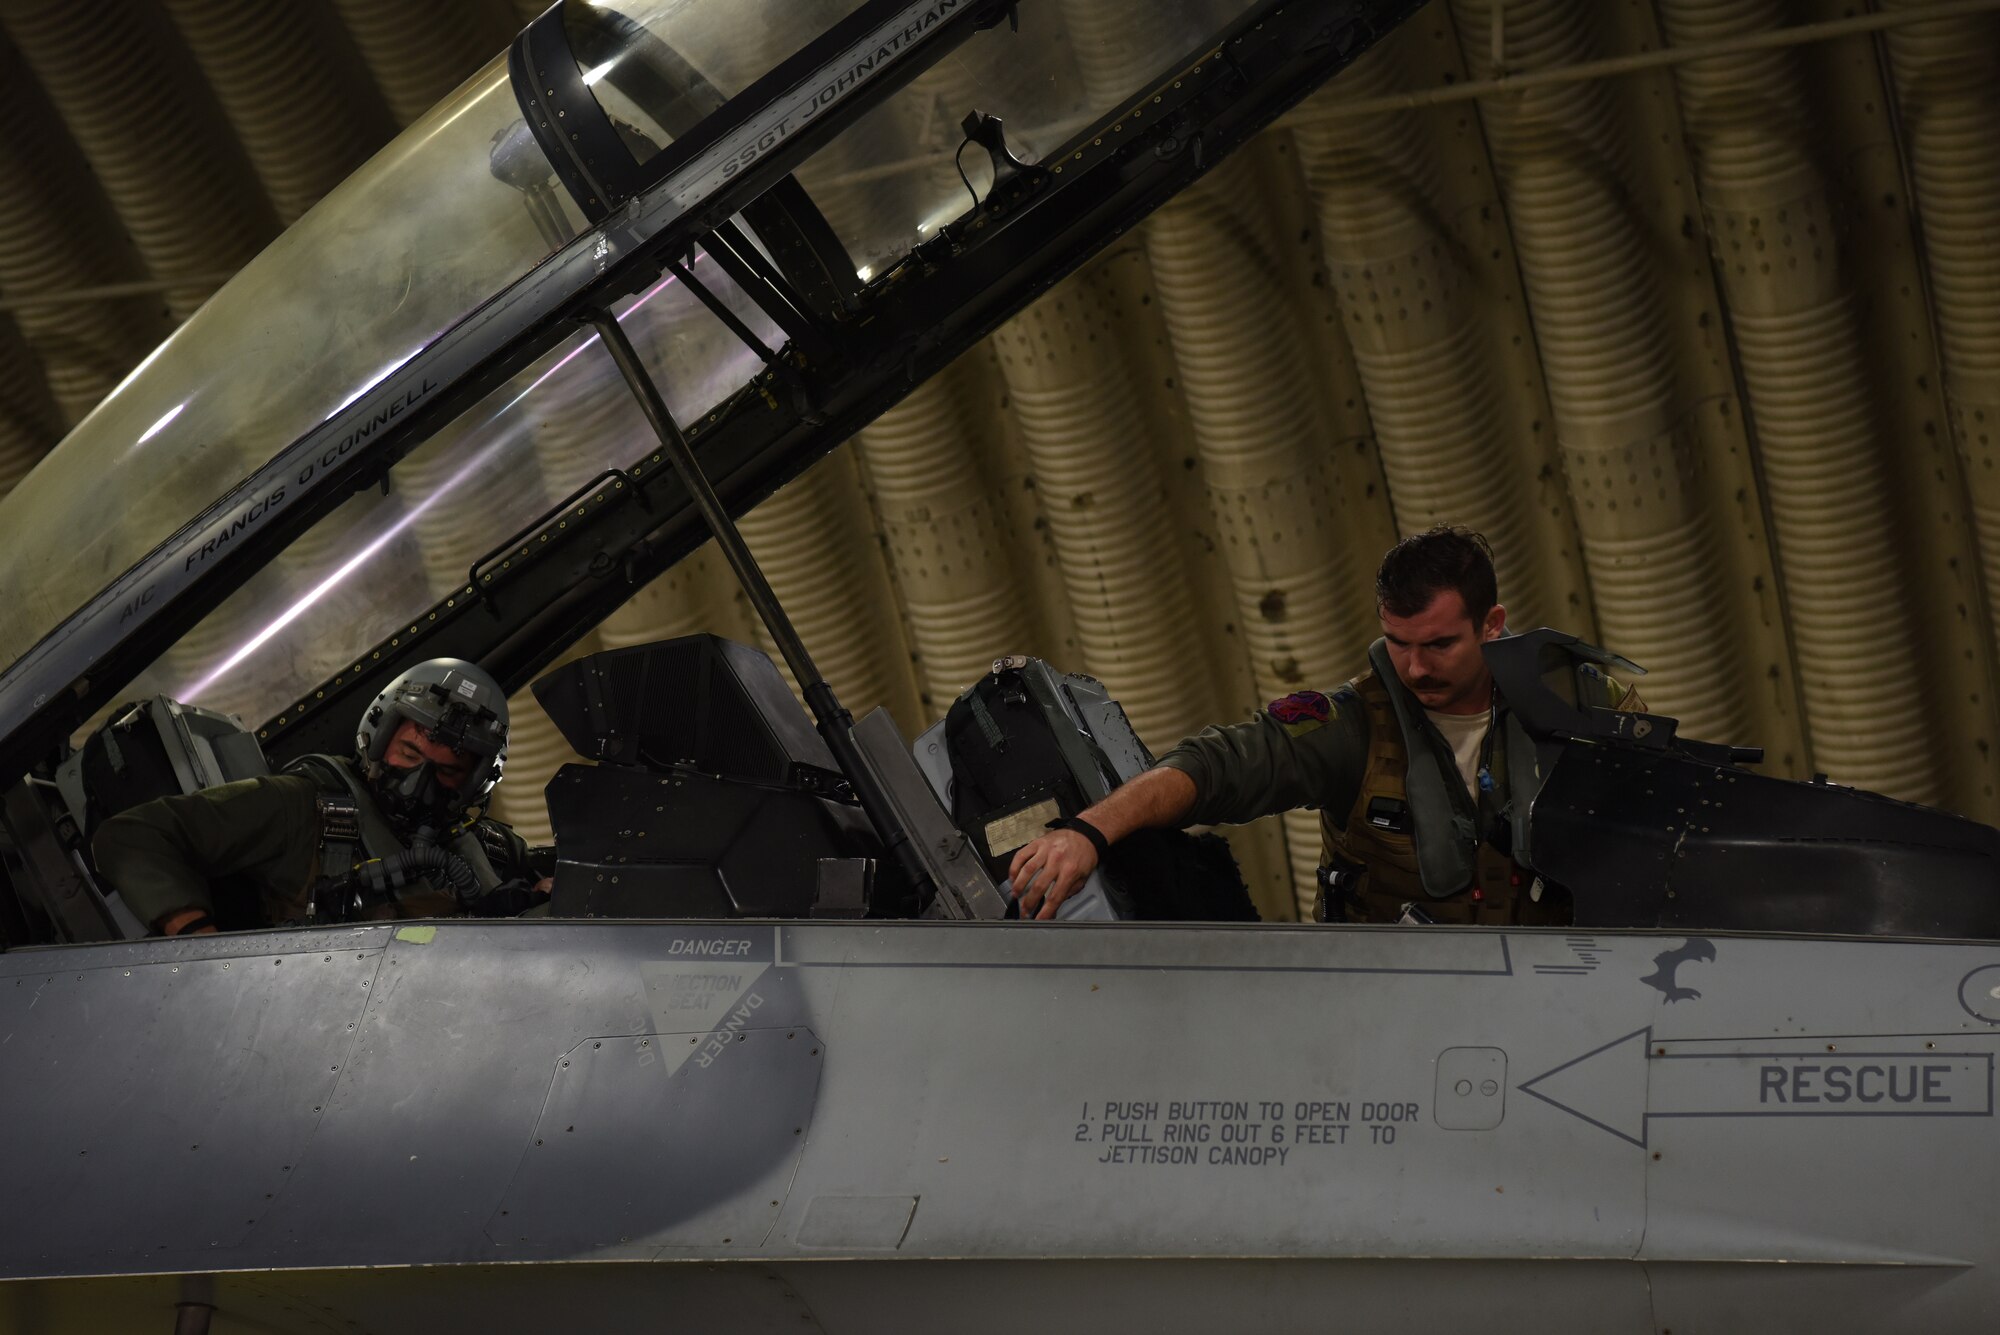 U.S. Air Force Capt. Michael Radosevich and 1st Lt. Scott Lafferty, 35th Fighter Squadron pilots, prepare for takeoff at Kunsan Air Base, Republic of Korea, Aug. 27, 2019. The 35th FS and 80th Fighter Squadron both pilot the F-16 Fighting Falcon, and perform regular training around the Korean peninsula. (U.S. Air Force photo by Staff Sgt. Joshua Edwards)